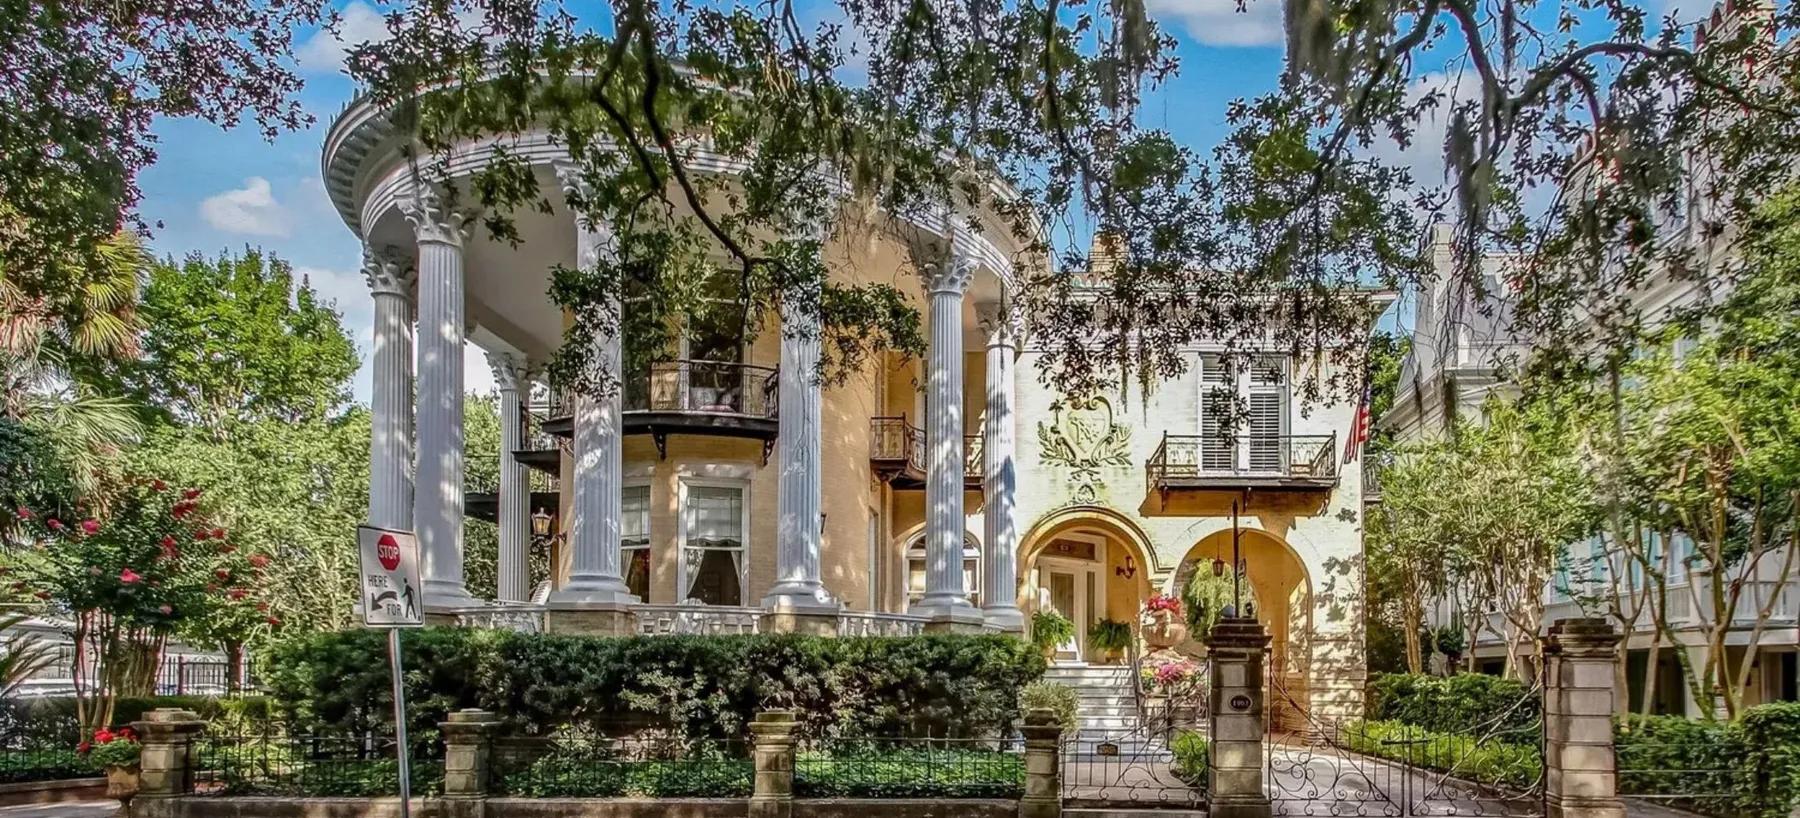 Find Luxury Homes in Kingston | Corcoran Austin Hill Realty